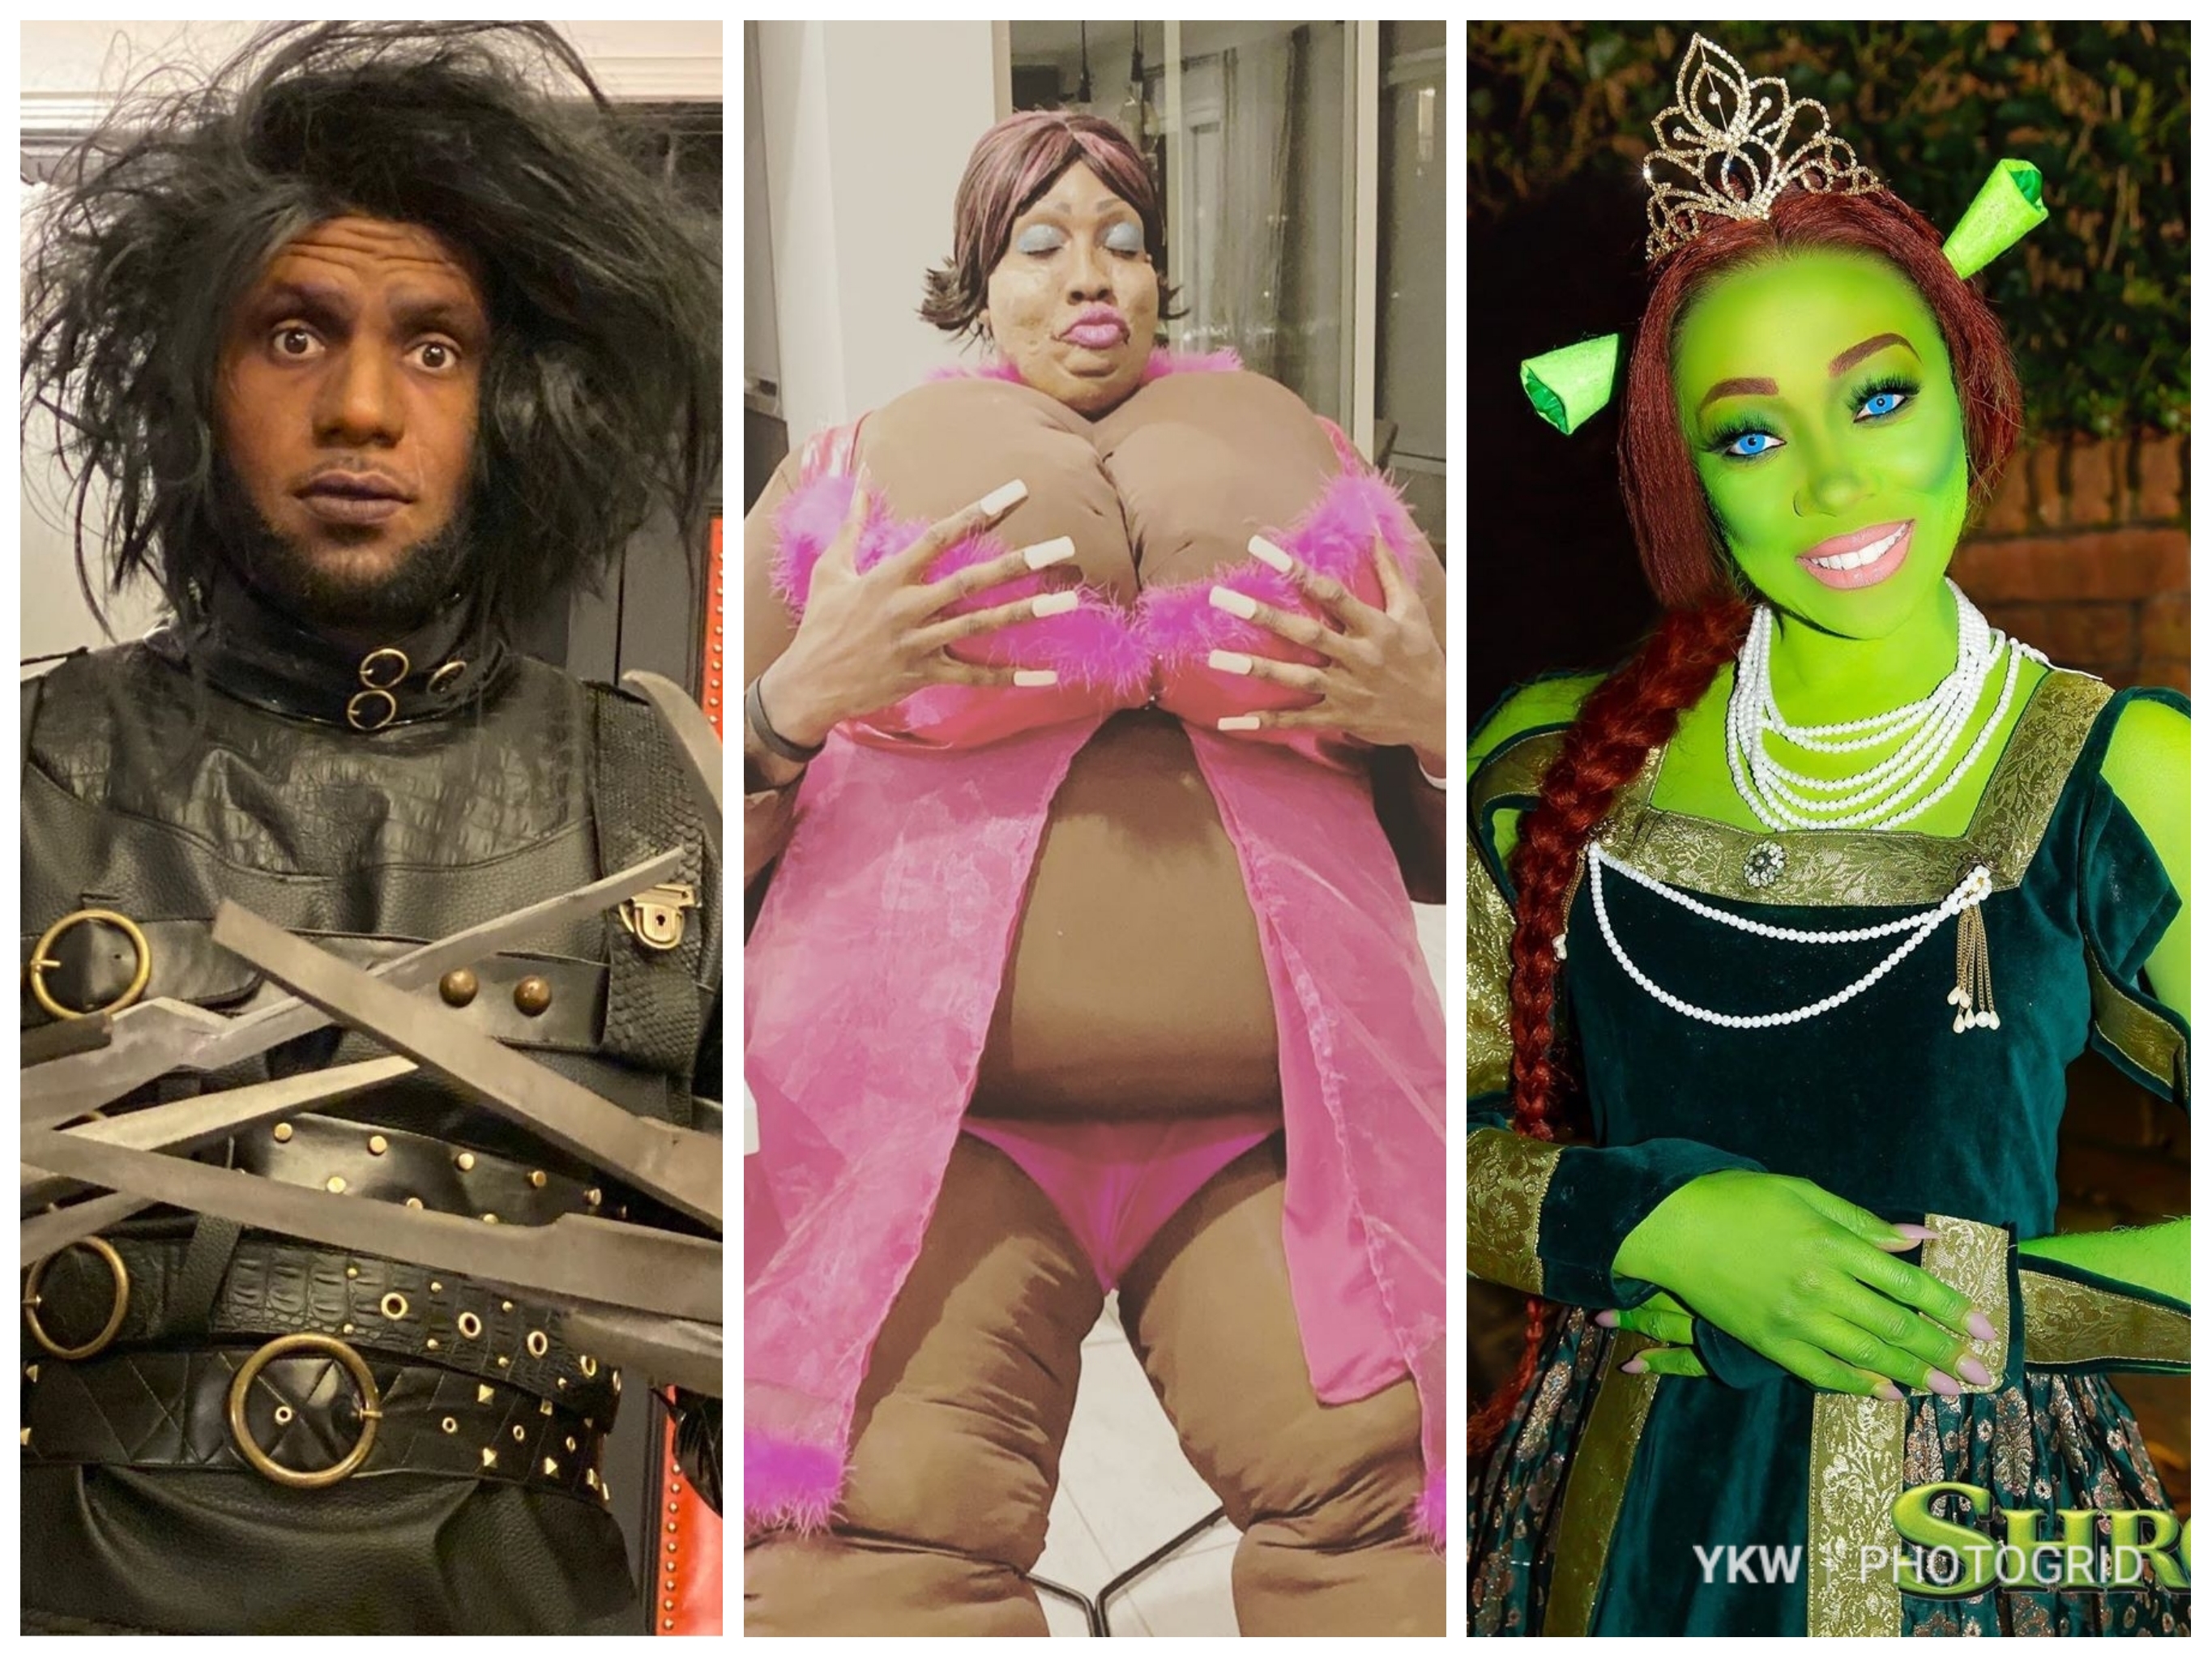 12 Of Our Favorite Celebrity Halloween Costumes Of 2019